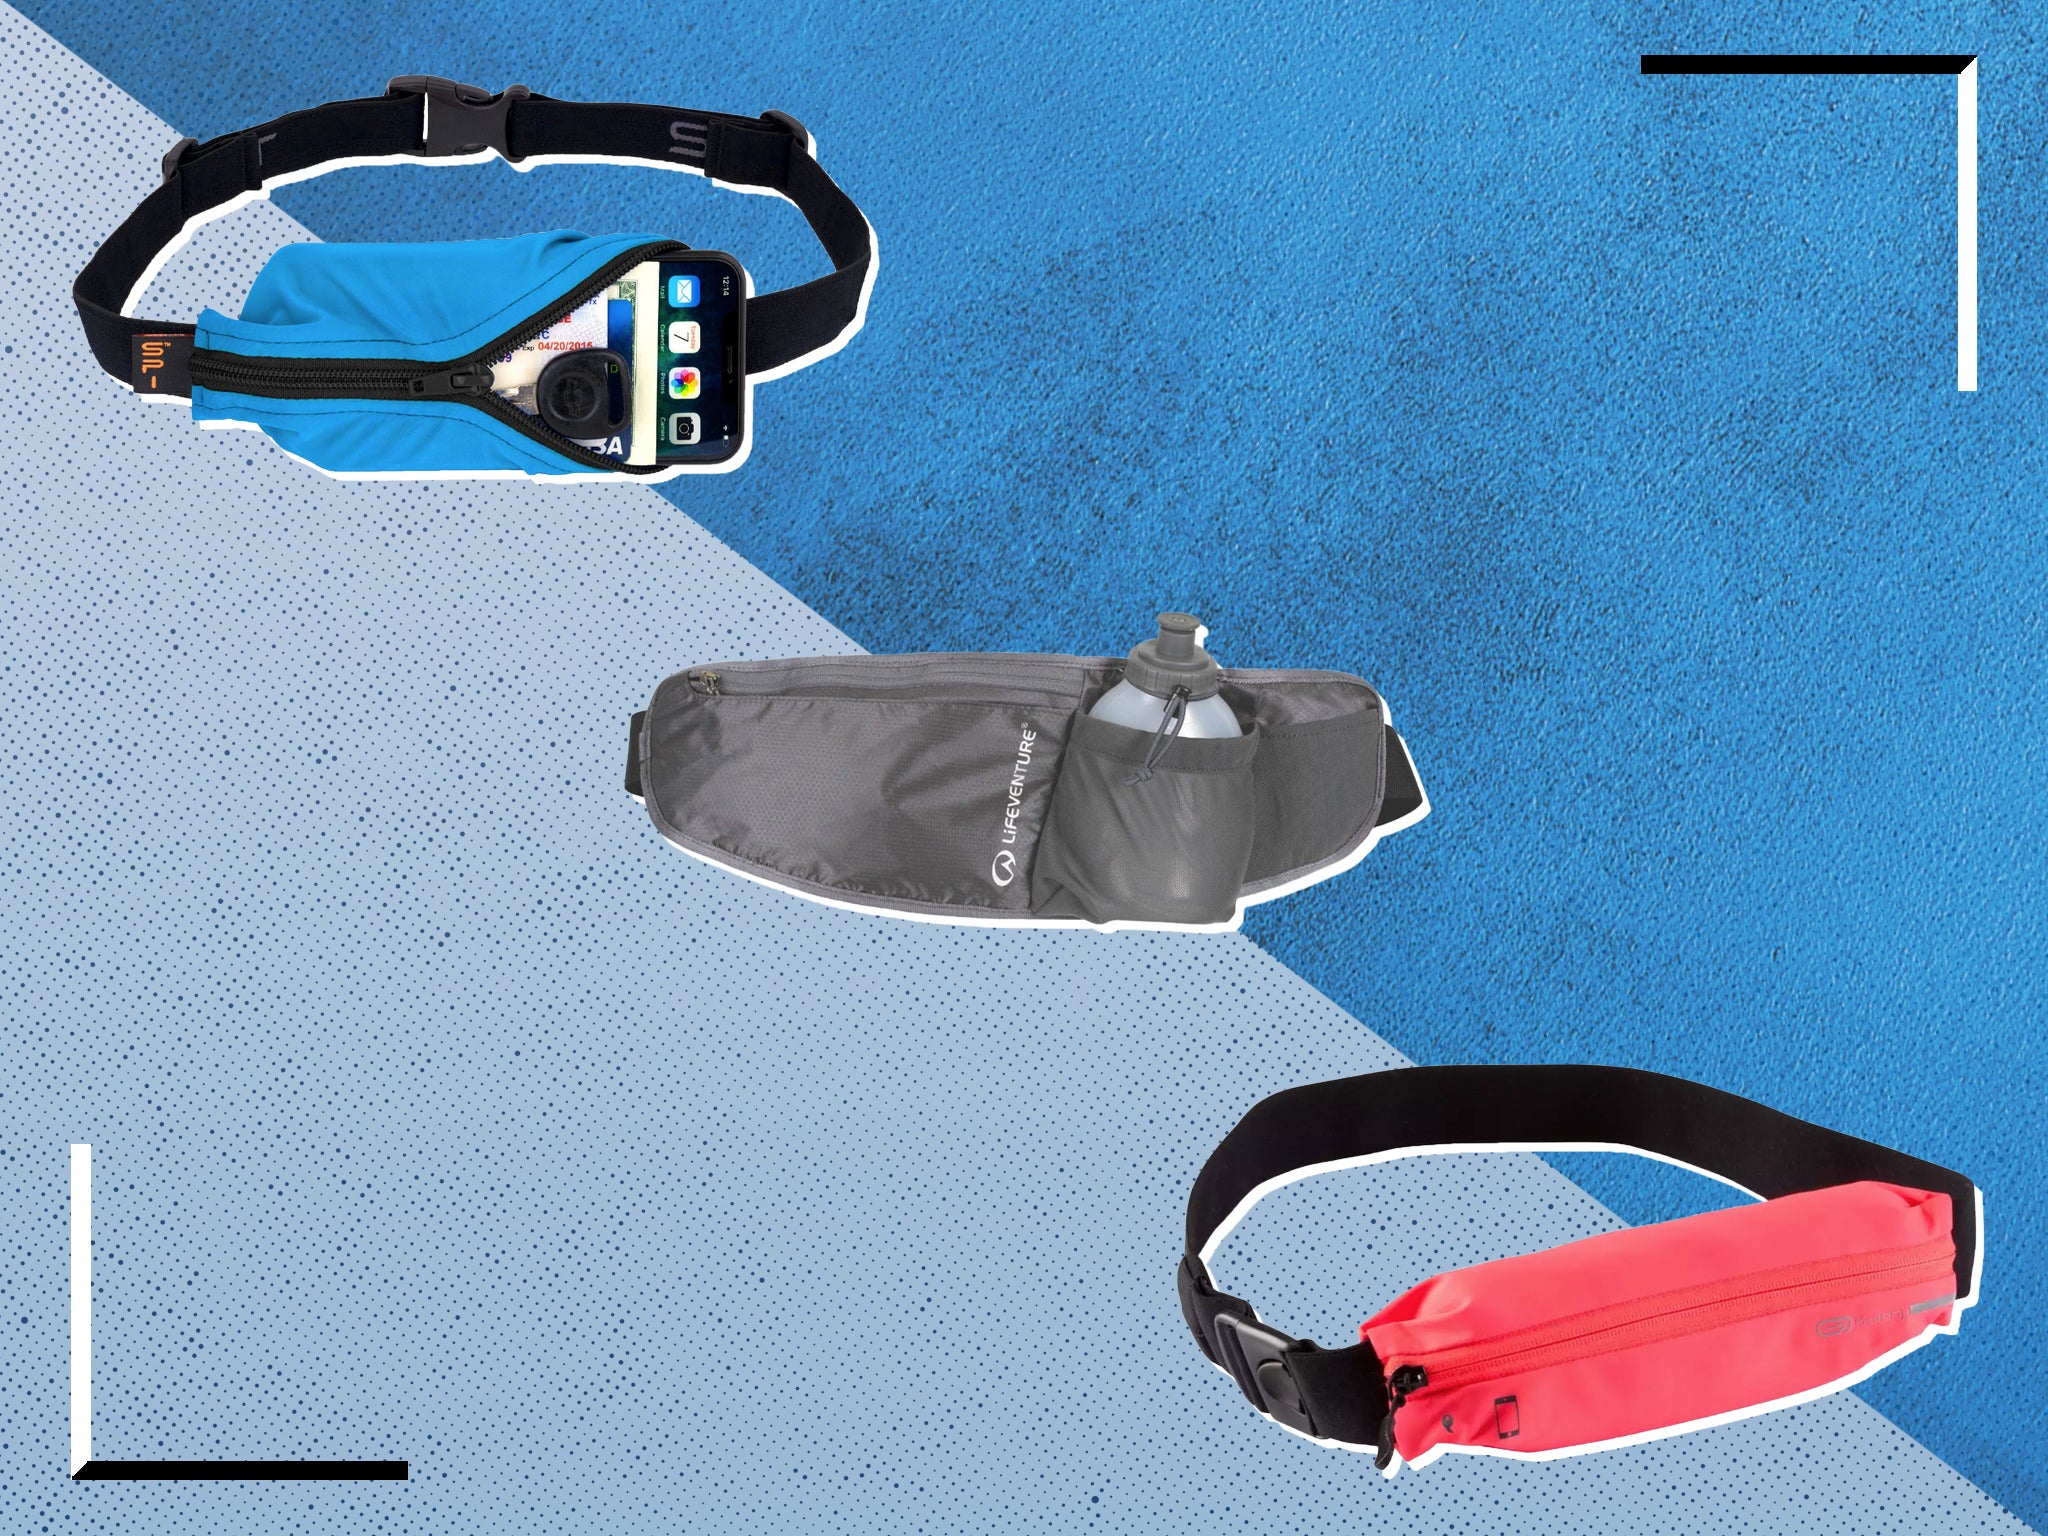 Offing Hydration Waist Running Belt w Two Water Bottles And Zippered Compartment 